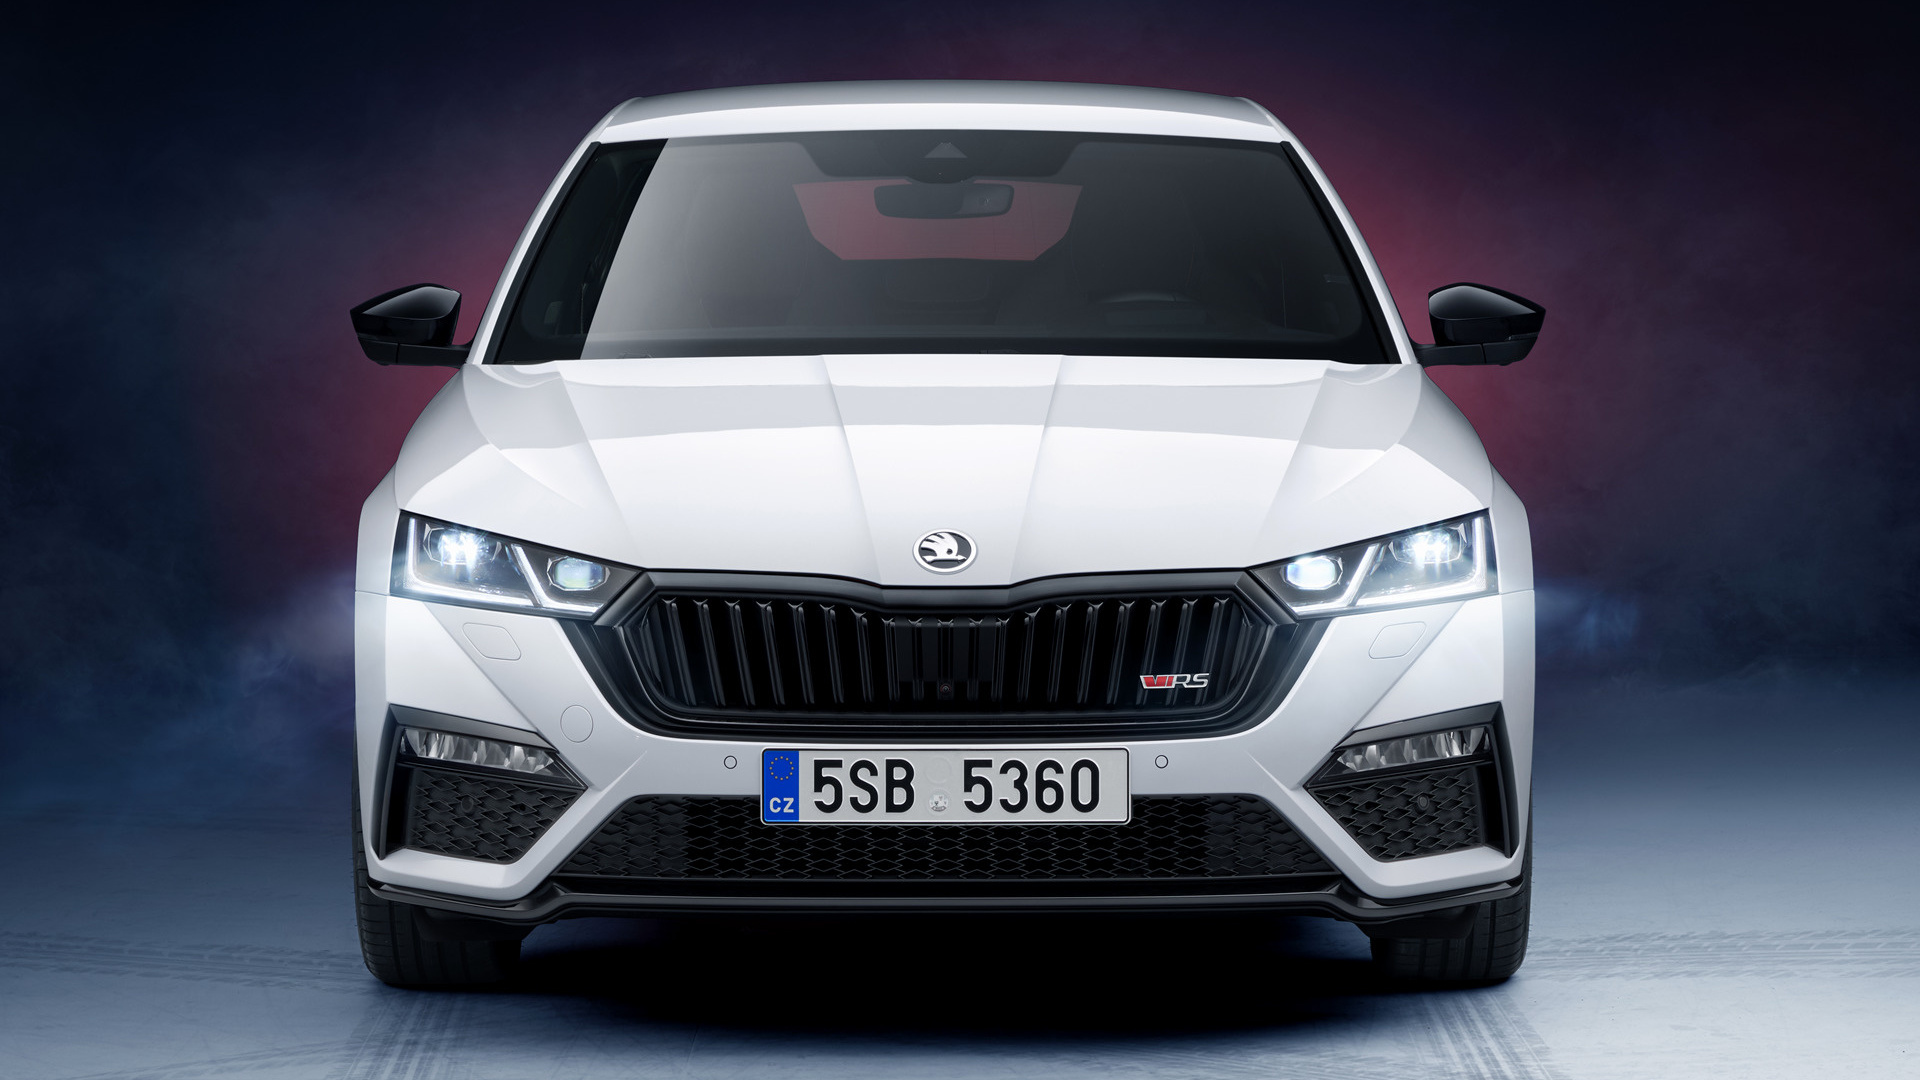 2020 Skoda Octavia RS iV - Wallpapers and HD Images